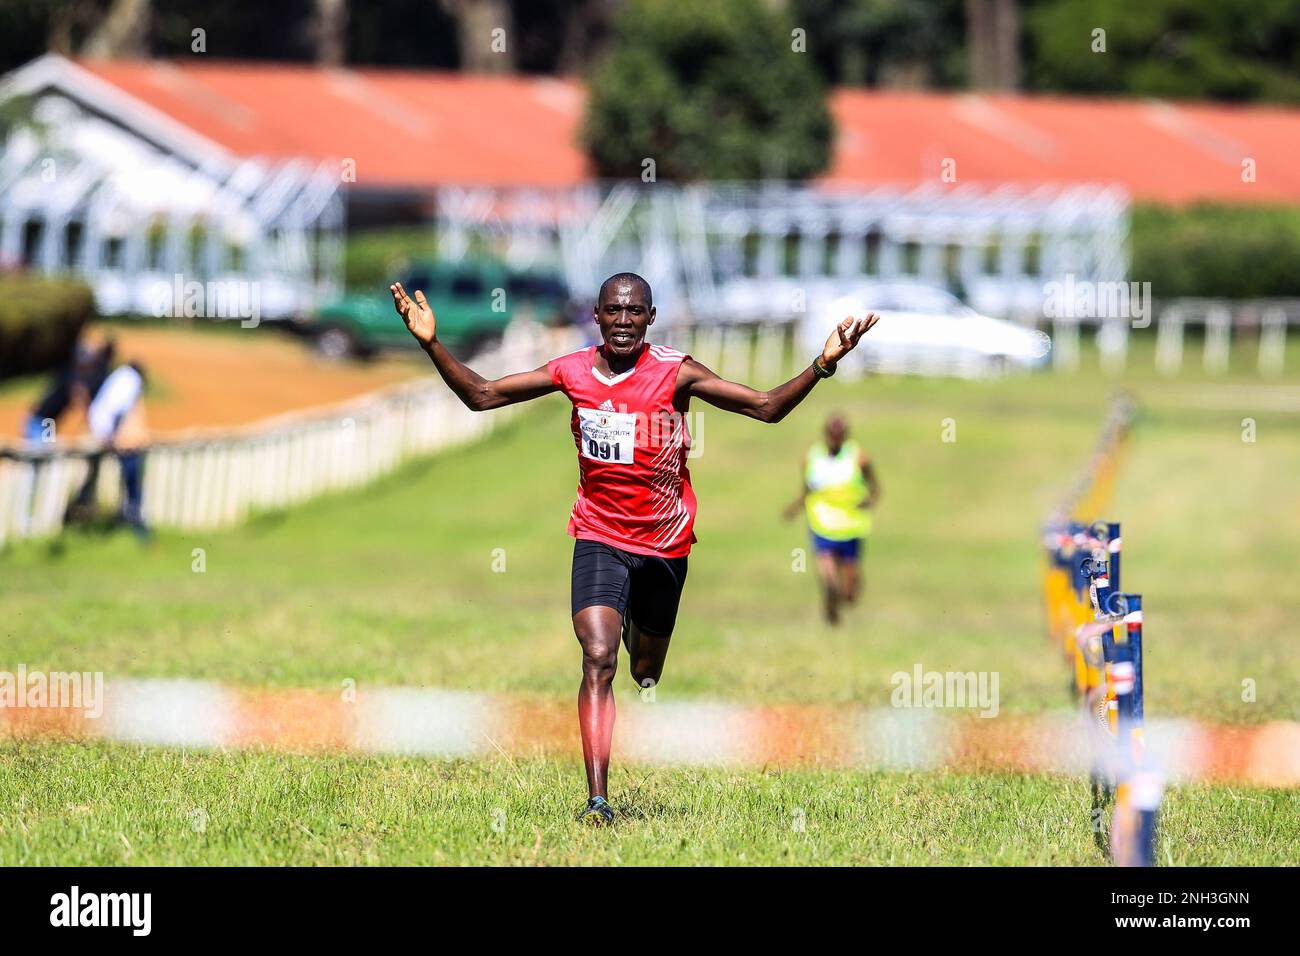 The National Police Service National Cross Country Championship at Ngong race Course in Nairobi, Kenya. Stock Photo